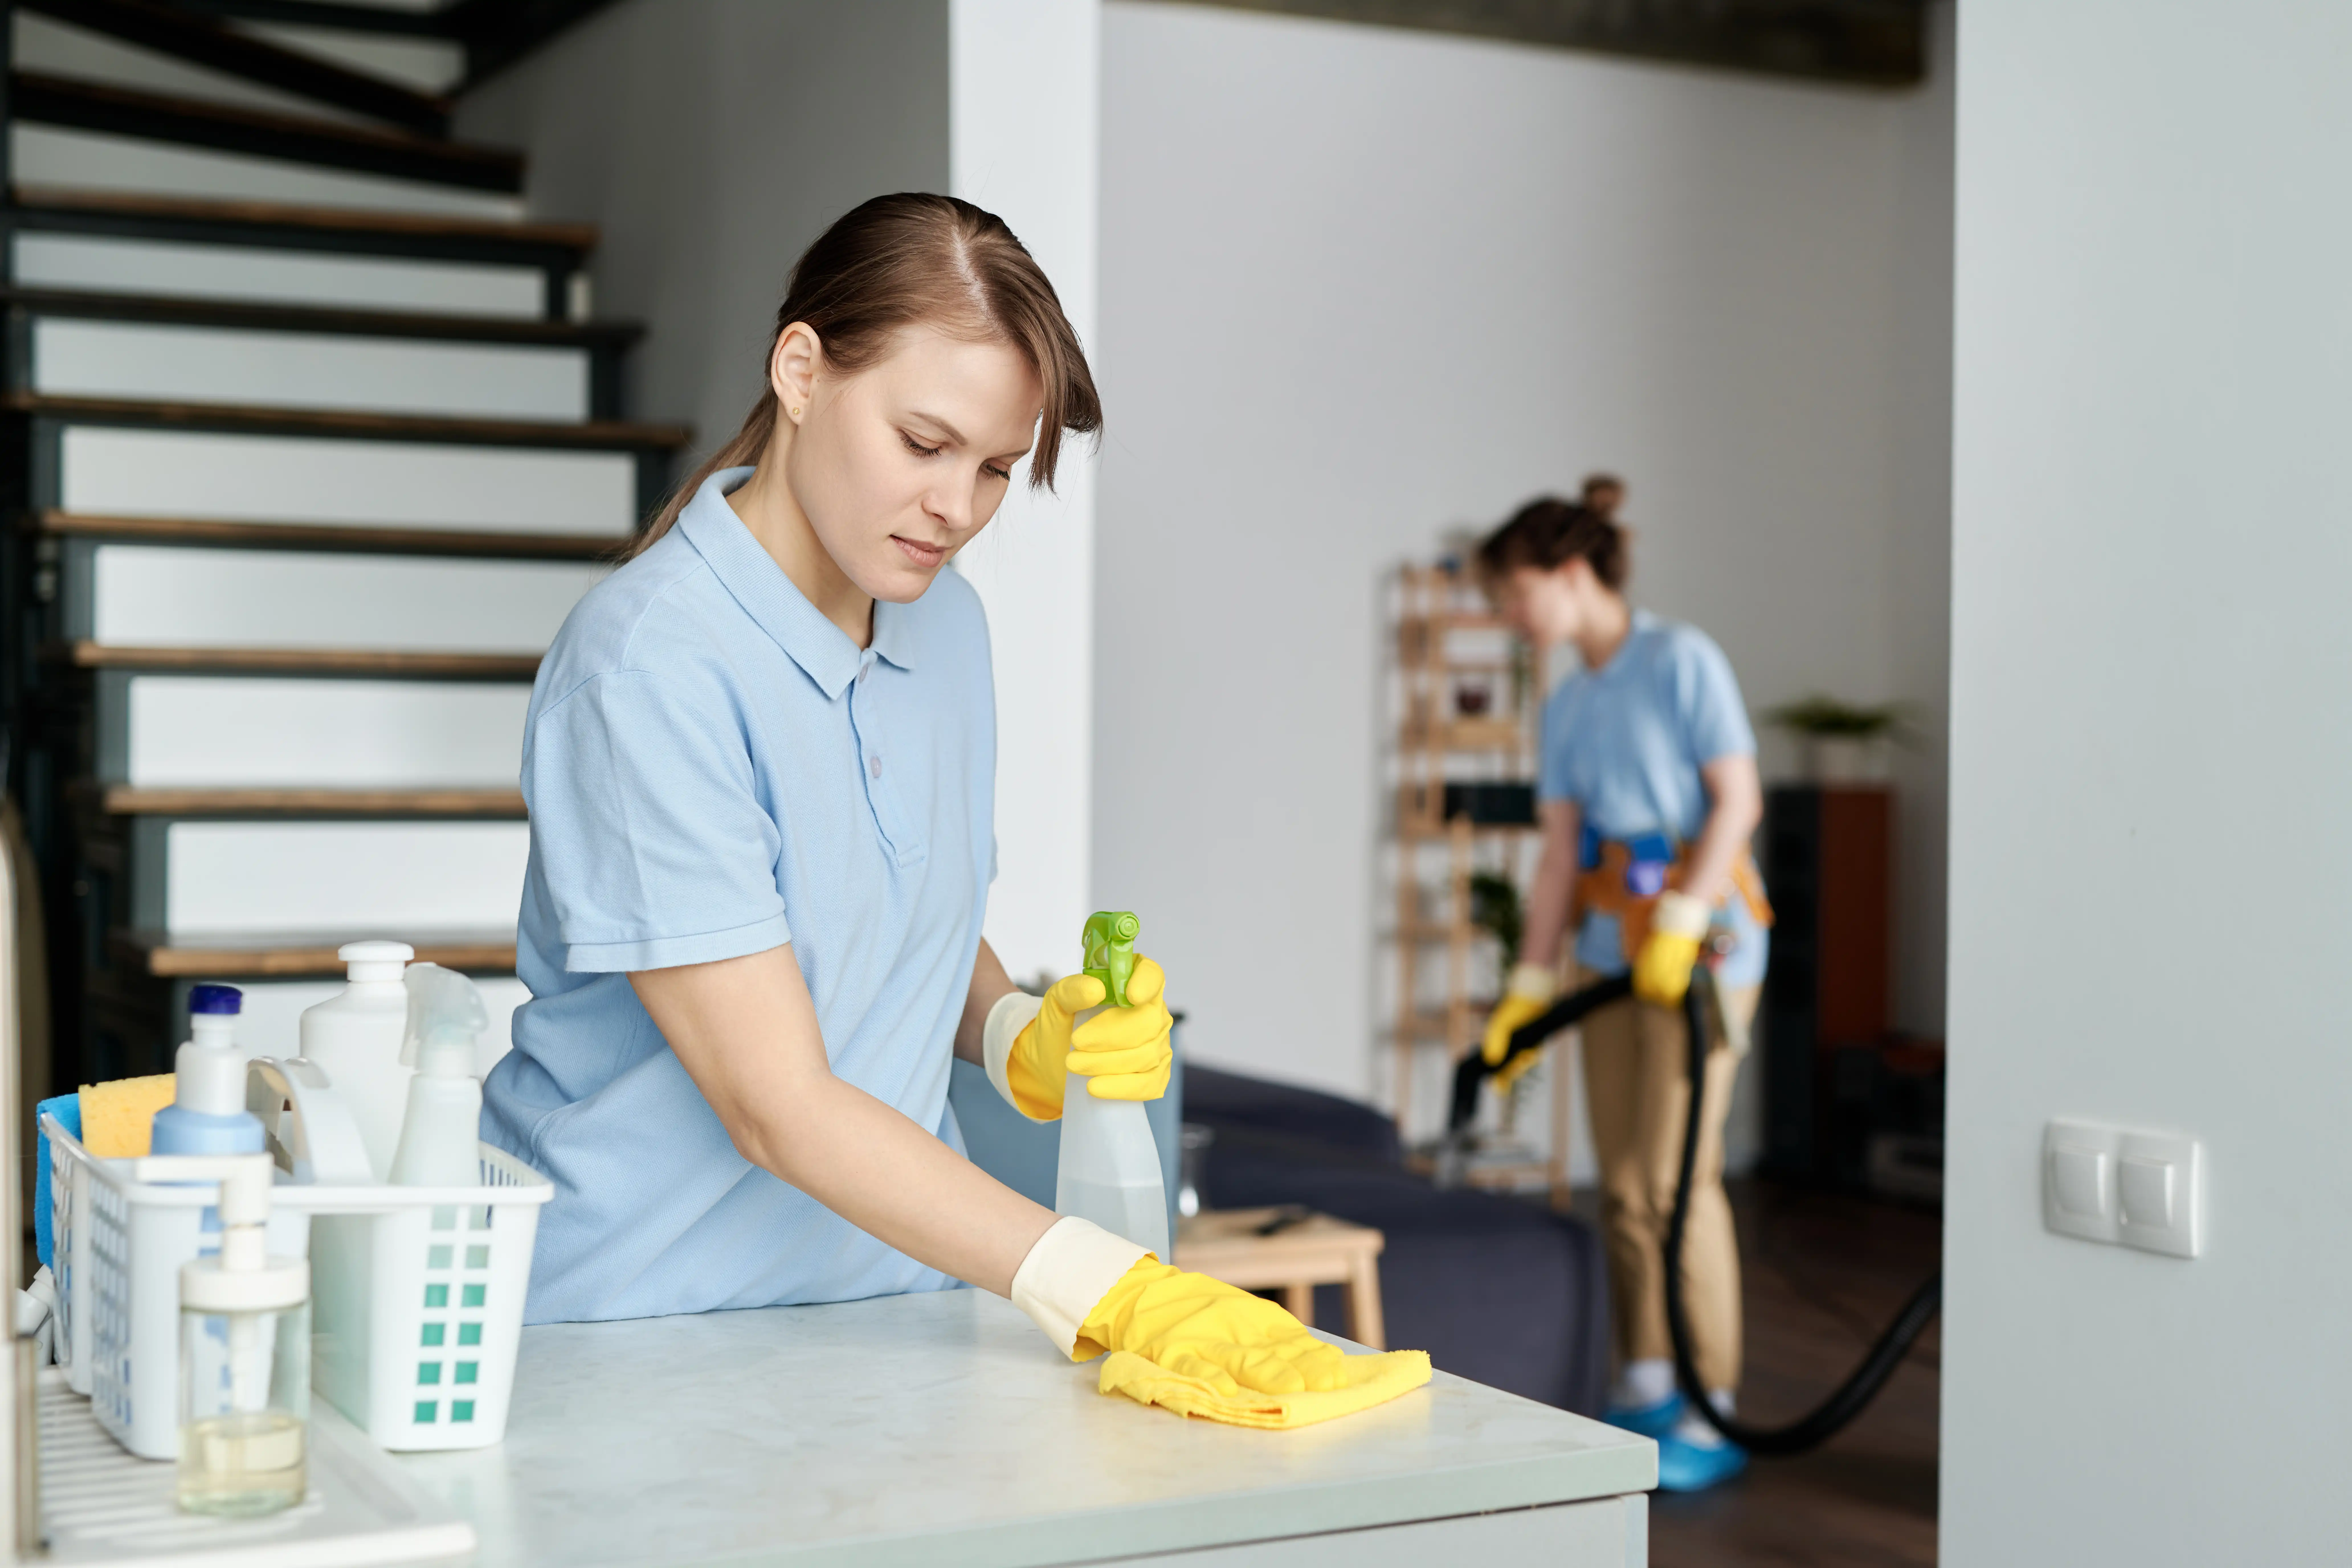 Cleaning Services Naples, Fort Myers Beach | House Cleaning Diamond Shine Cleaning Enterprises LLC